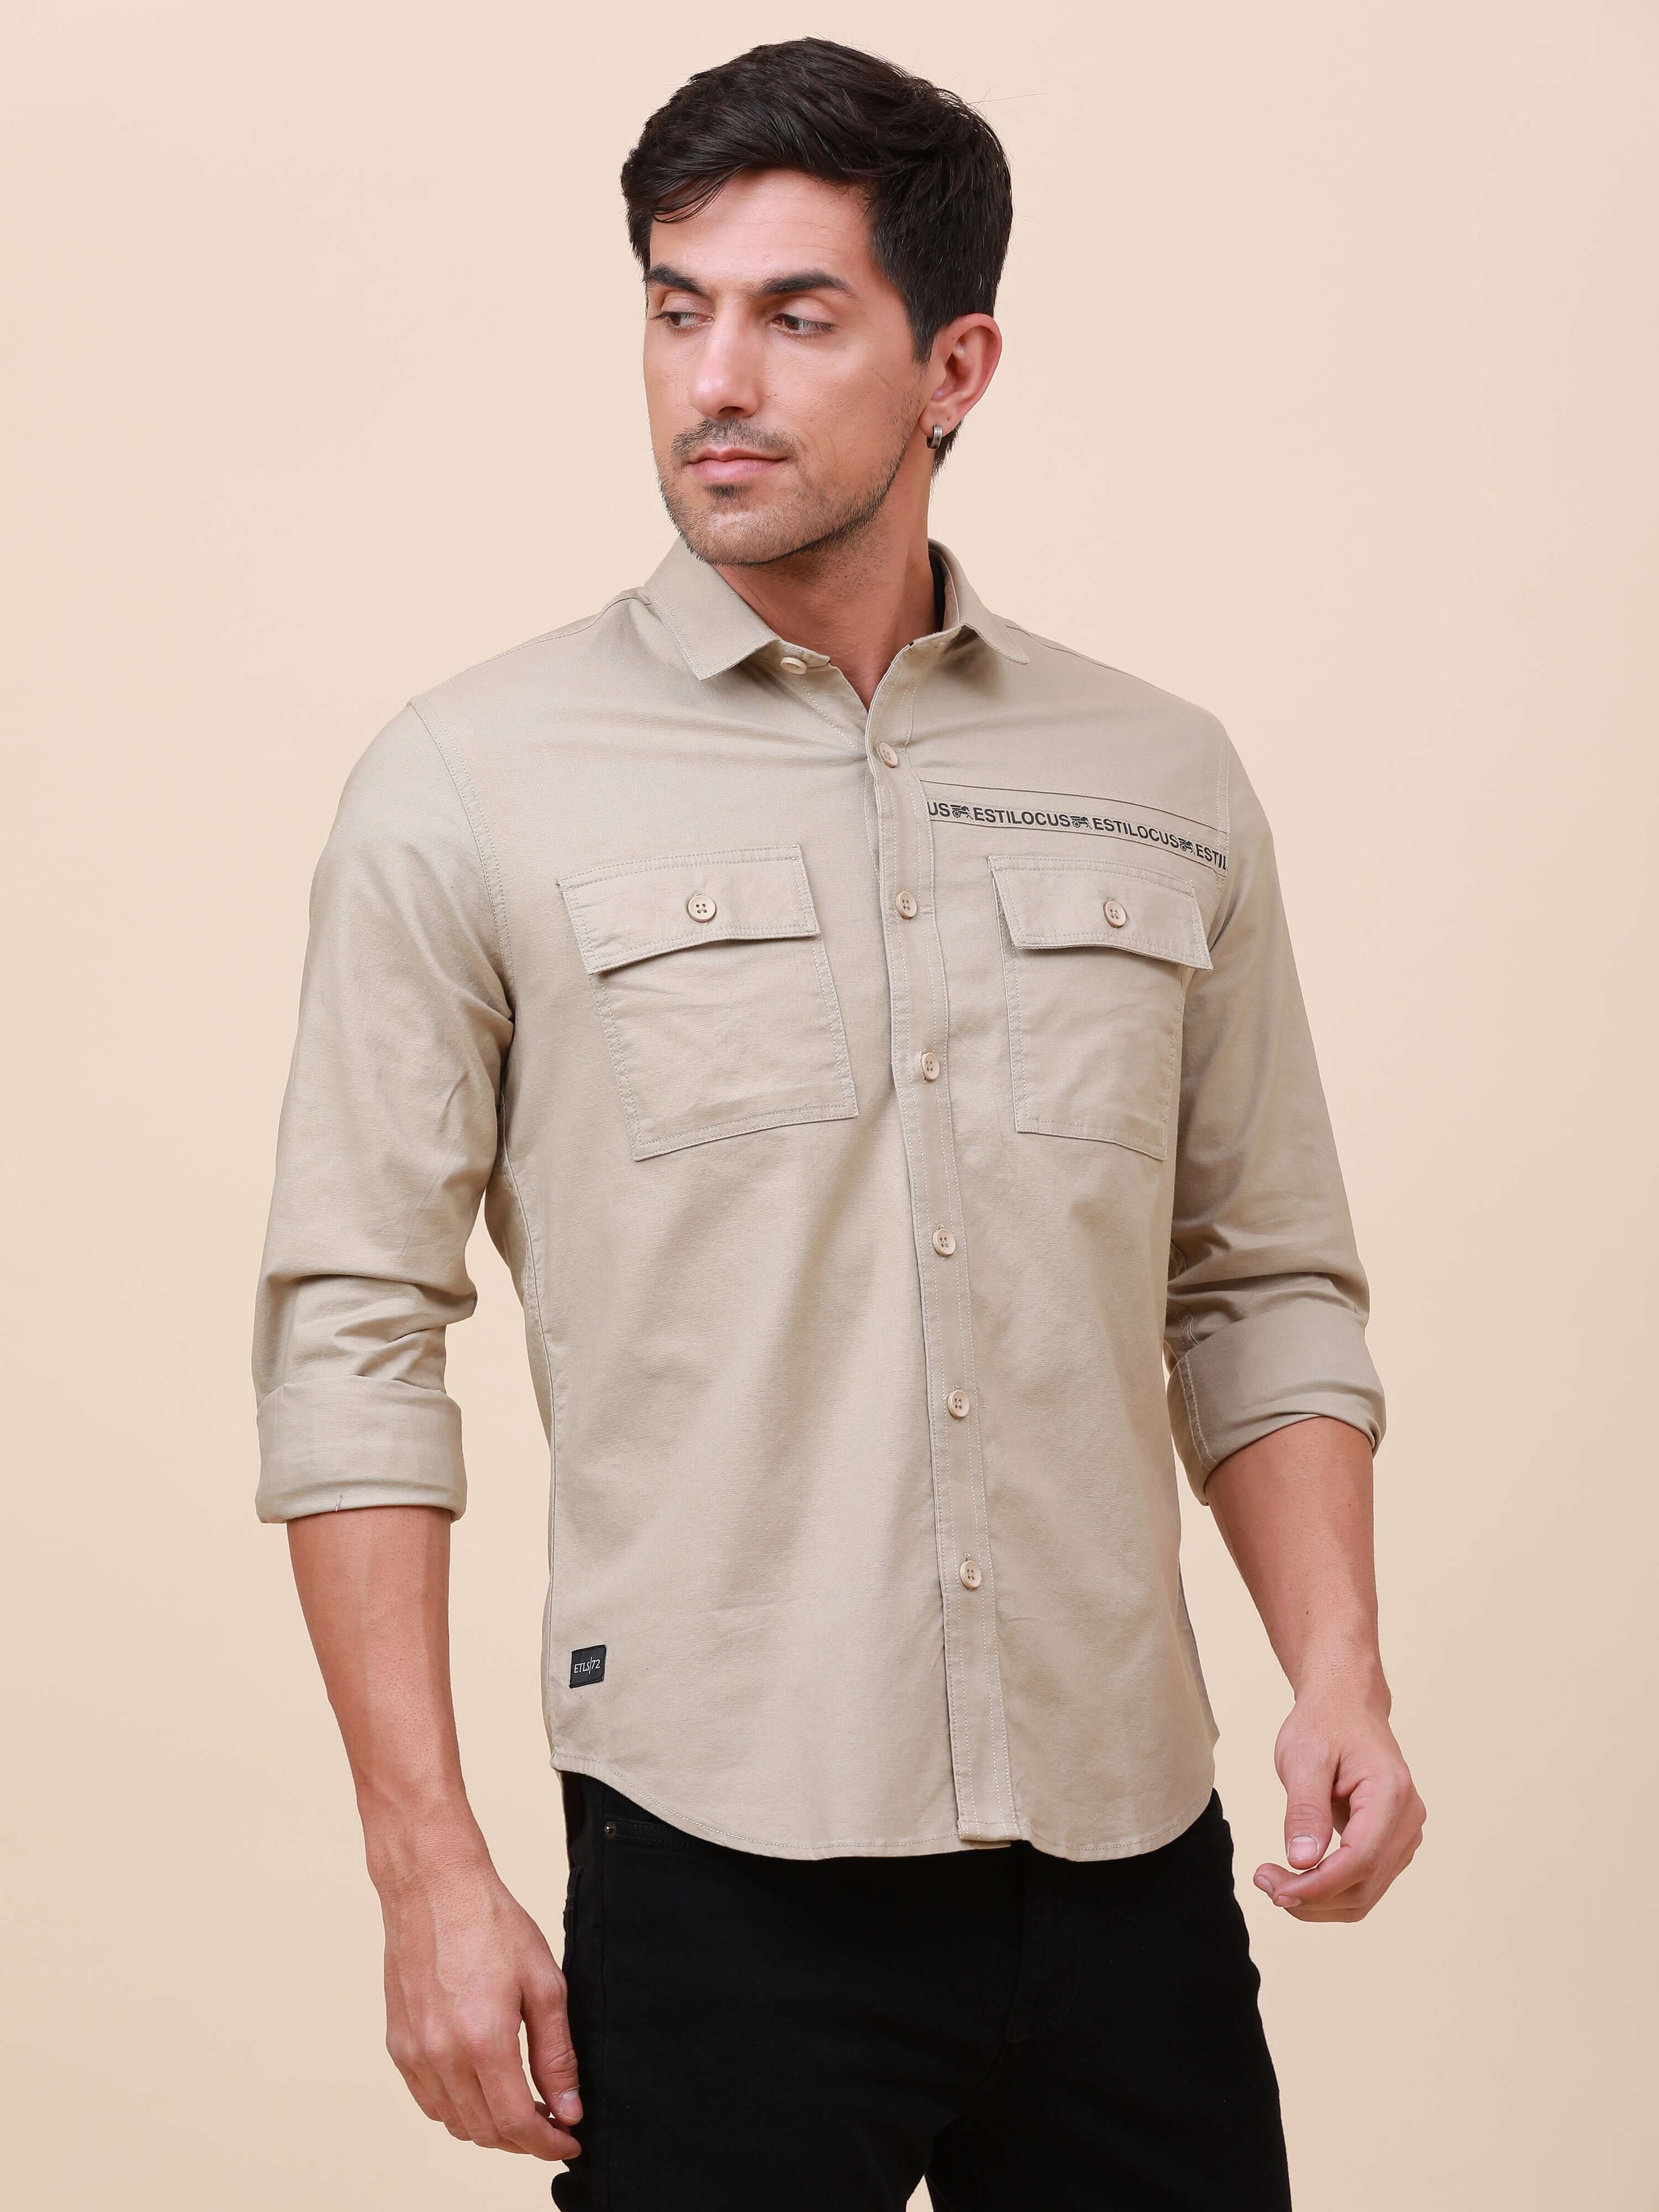 Beige Solid Double Pocket Shirt shop online at Estilocus. 100% Cotton , Full-sleeve solid shirt Cut and sew placket Regular collar Double button edge cuff Double pocket with flap Curved bottom hemline Finest printing at front placket. All double needle co